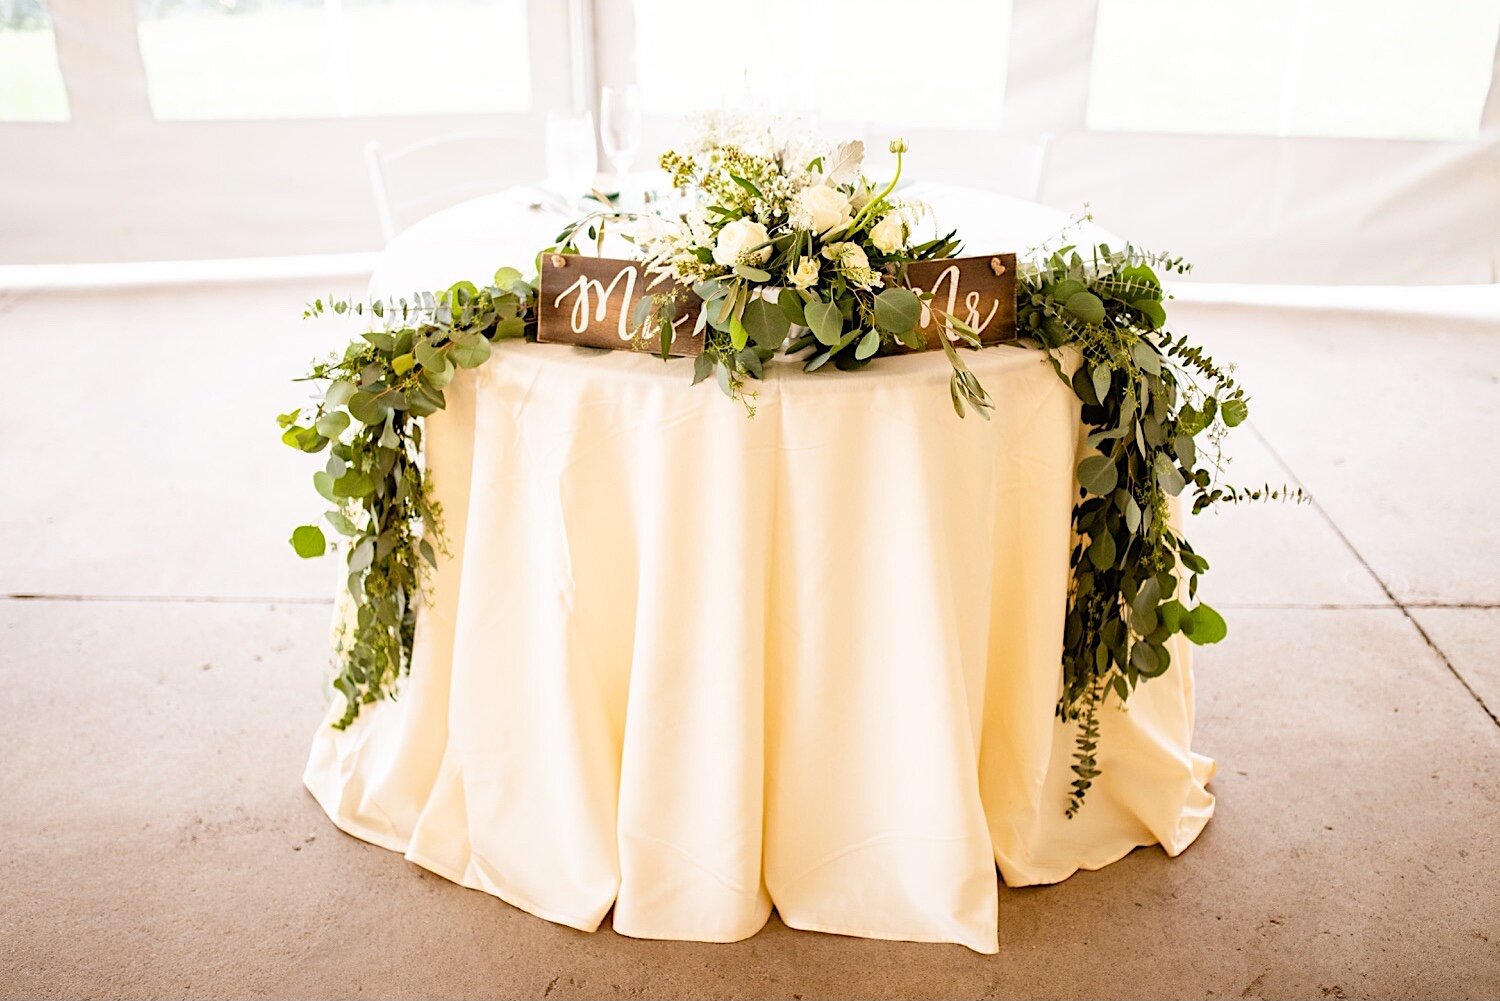  Sweetheart table, Greenery runner, Catholic Colorado Wedding Ceremony at Saint Francis of Assisi and Reception at Arrowhead Golf Club, Colorado Wedding Planner, Colorado Wedding Planning, Colorado Wedding, Denver Wedding, Wedding Inspiration, Weddin